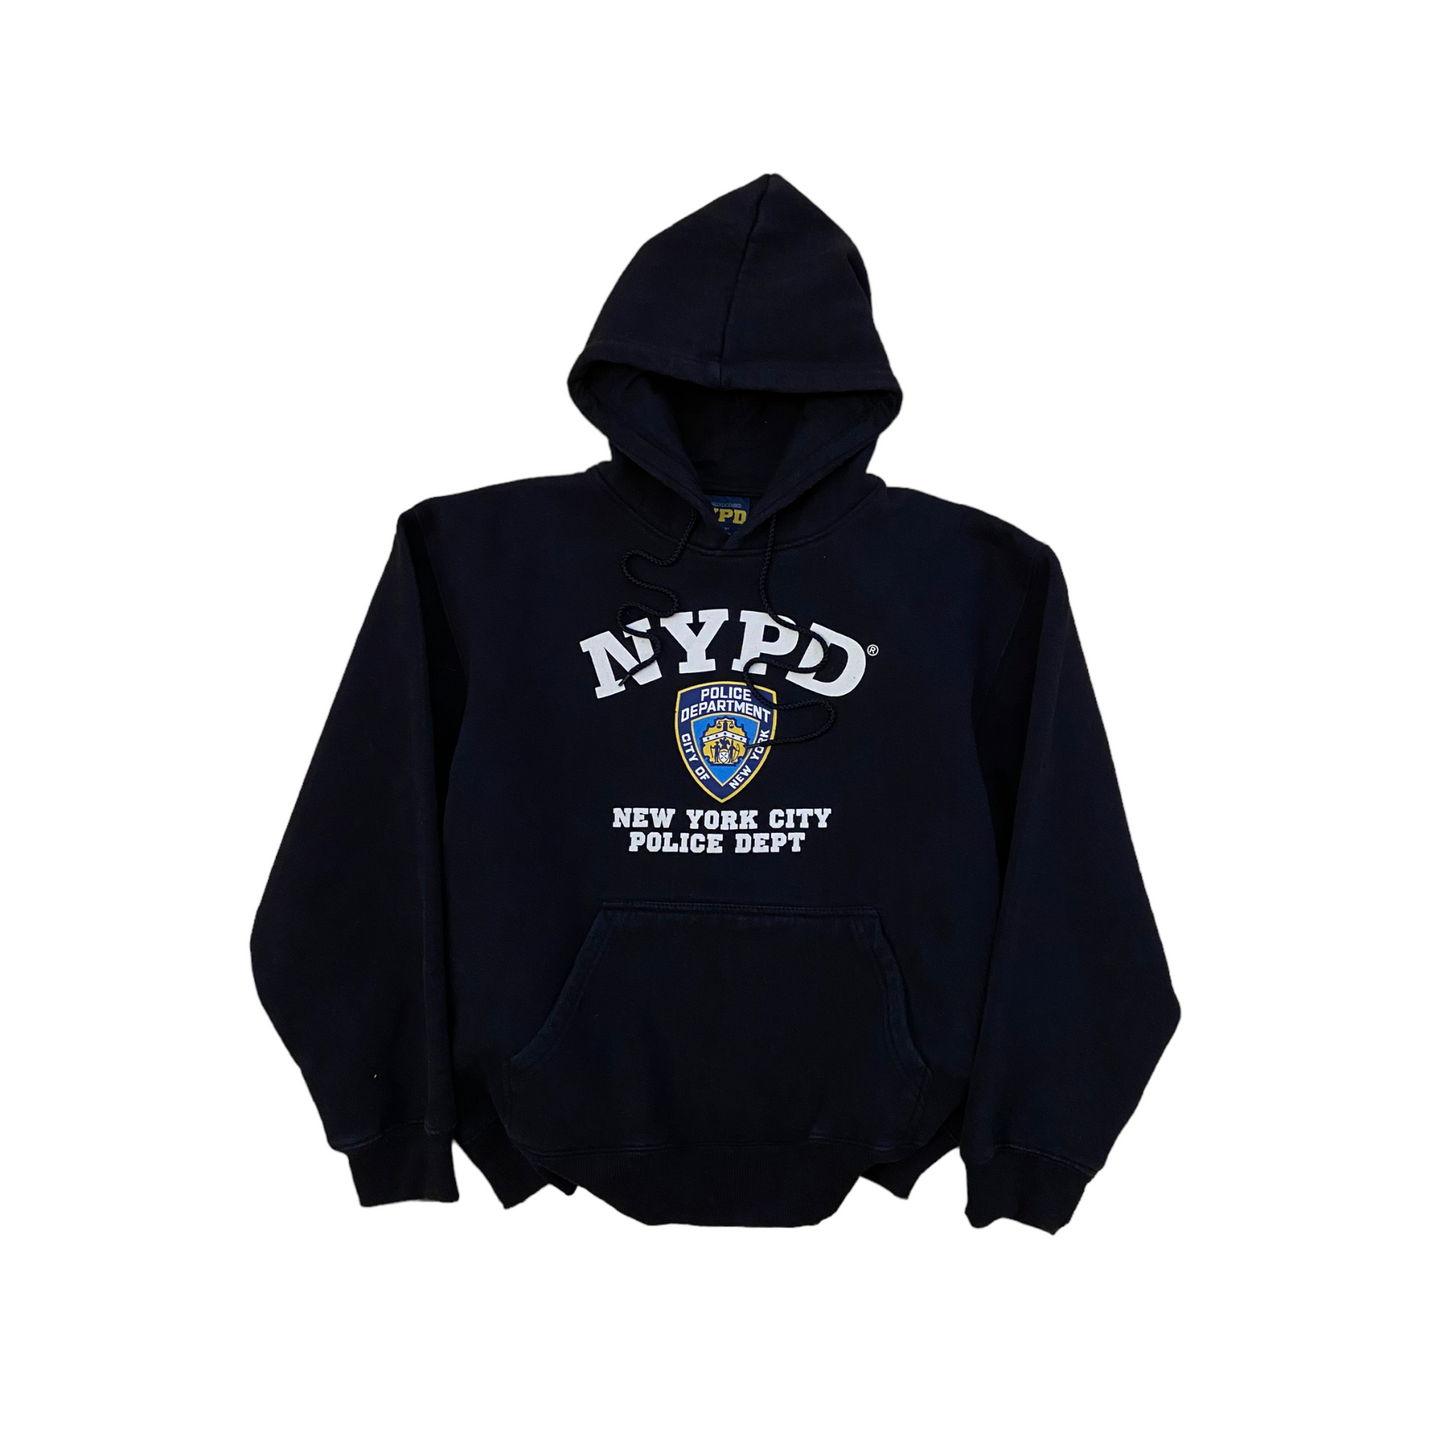 NYPD Hoodie S/M